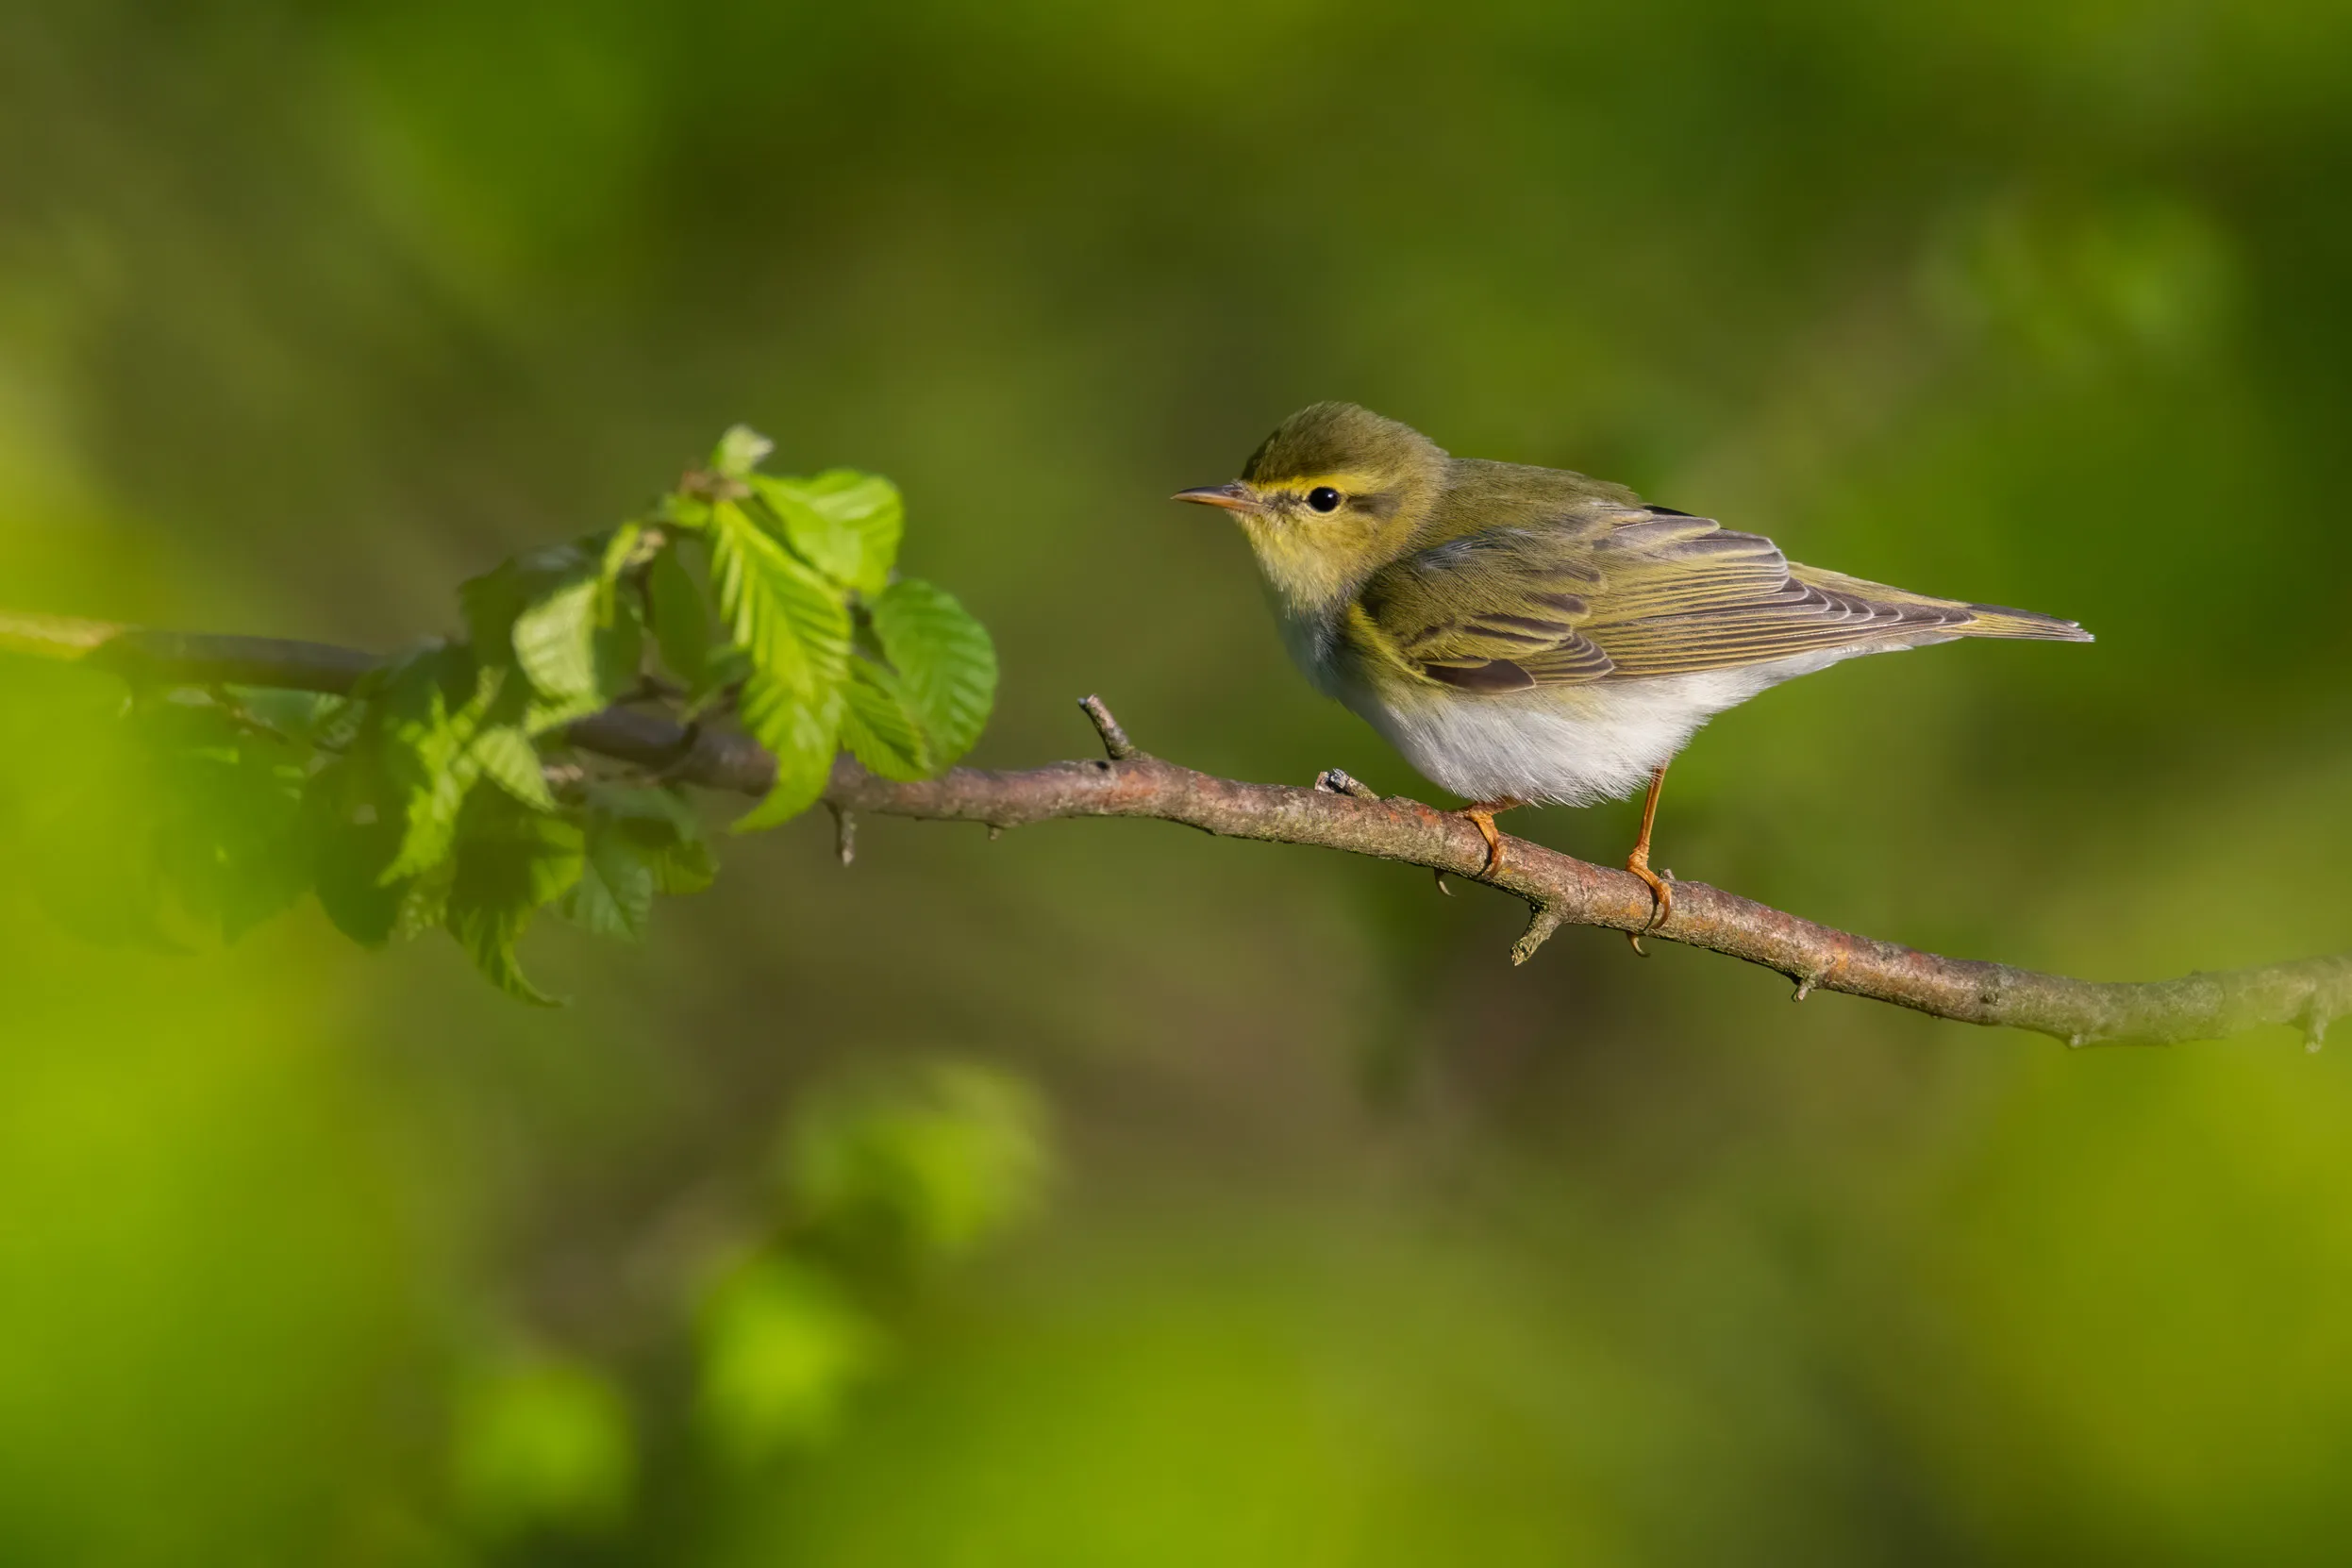 Small bird with a white belly and yellow, green and brown colouring, perched on a leafy branch.